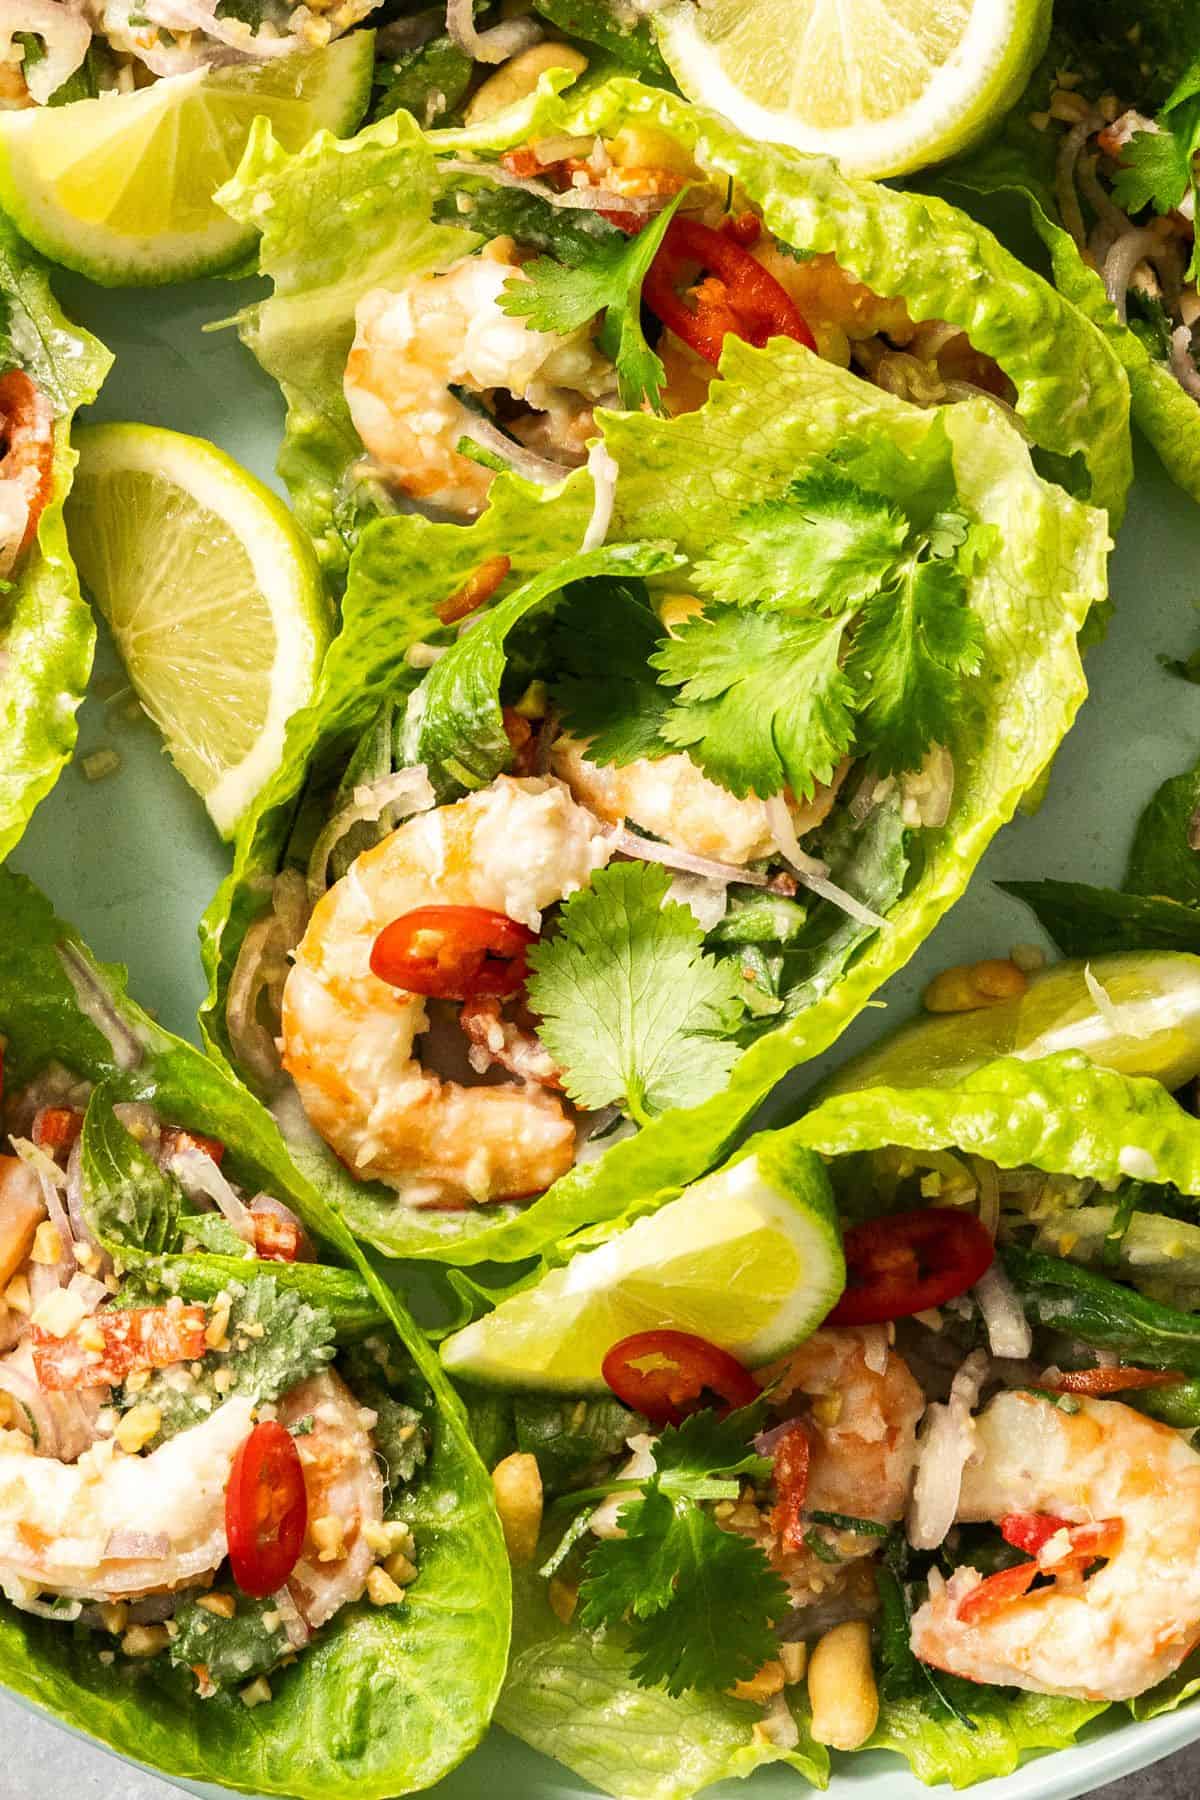 Up close shot of Thai Prawn Salad on a round green plate, showing the detail of a lettuce cup with the salad.